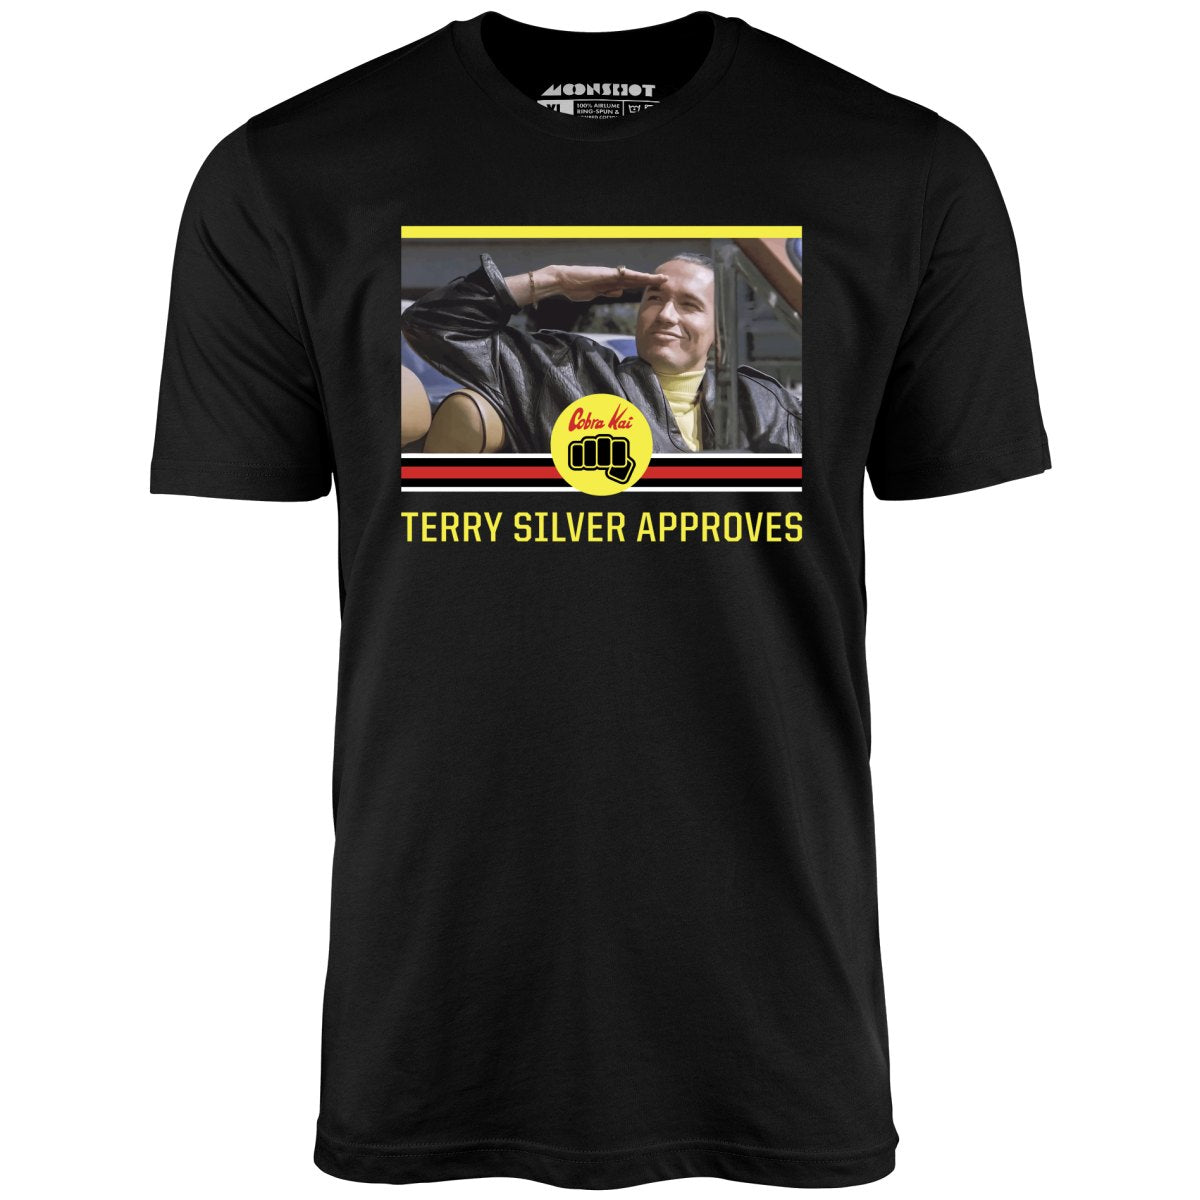 Terry Silver Approves - Unisex T-Shirt